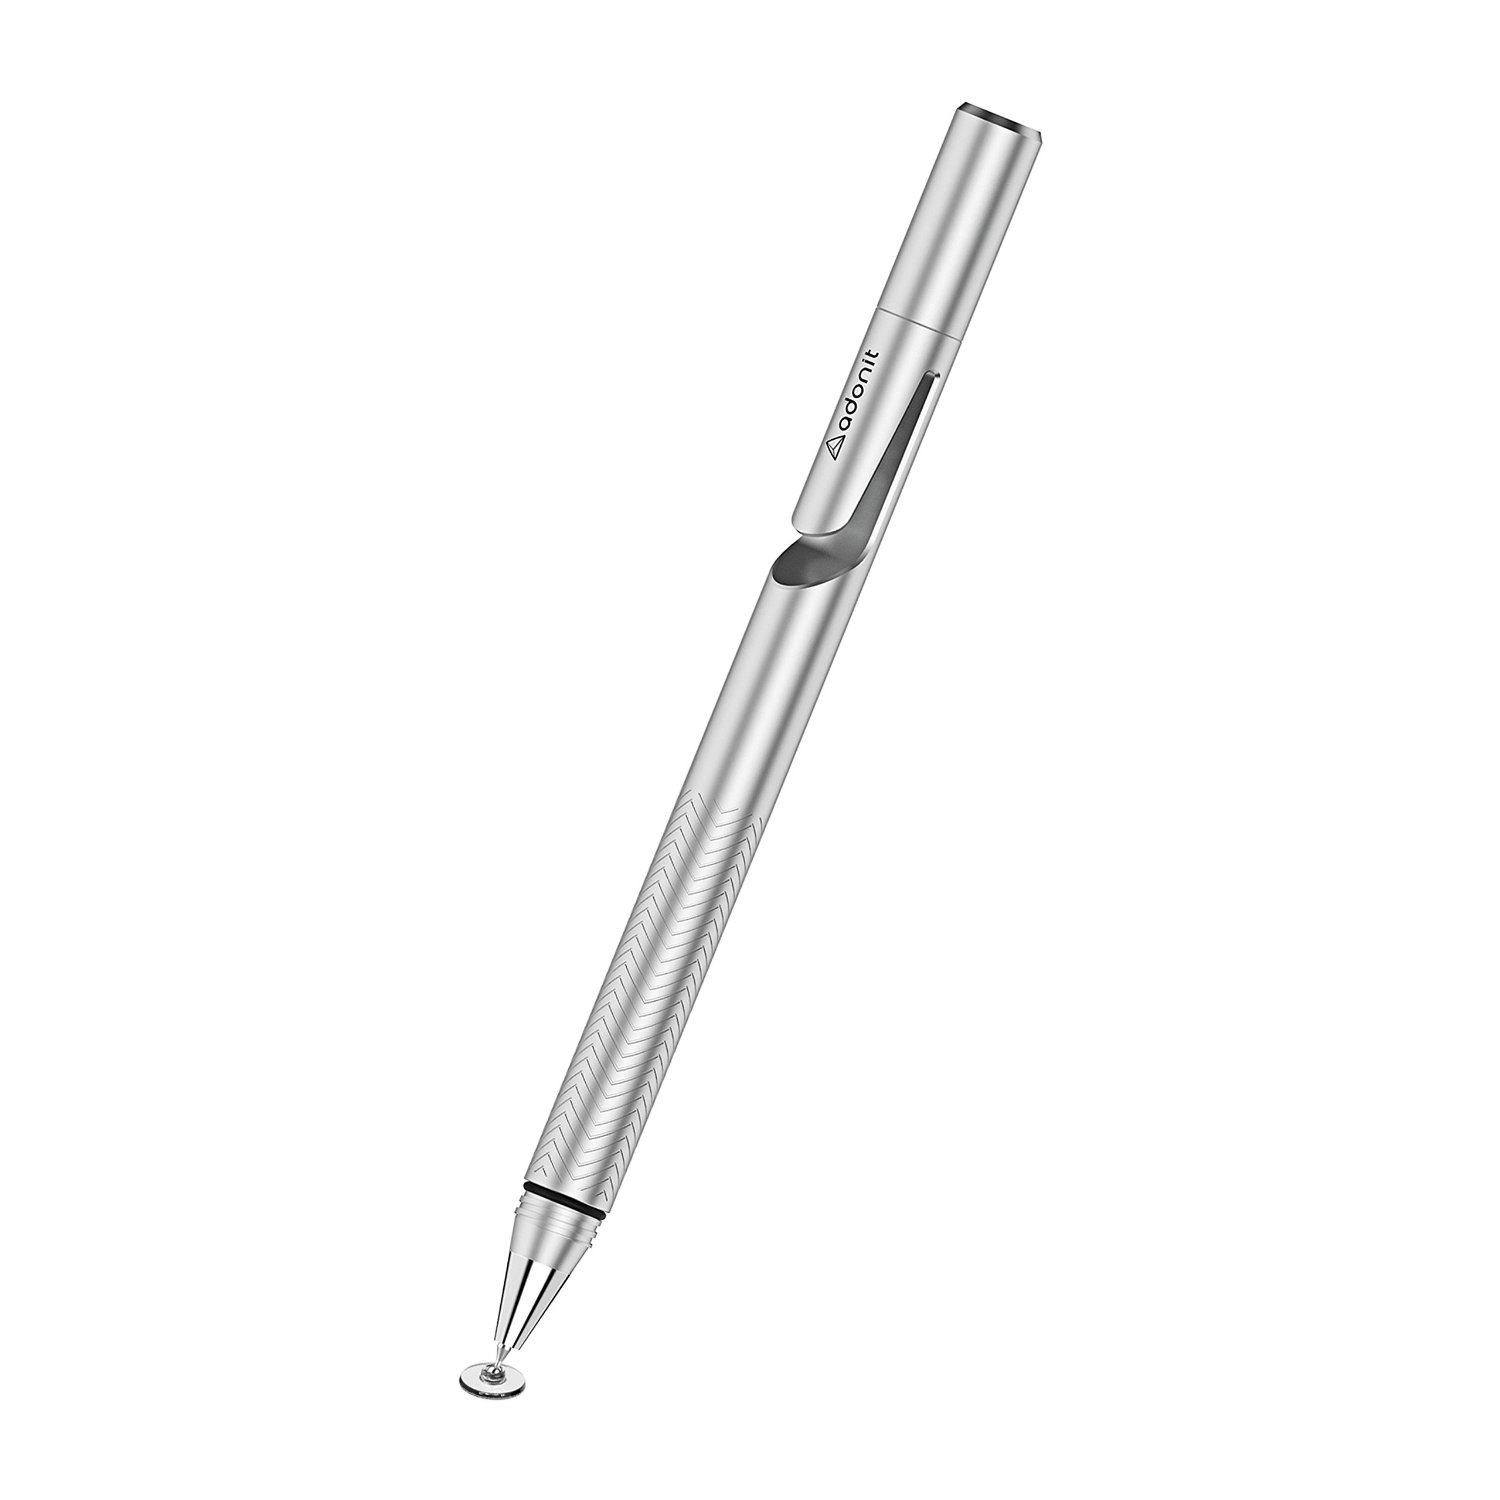 Silver Fine Point Stylus for Smartphones and Tablets